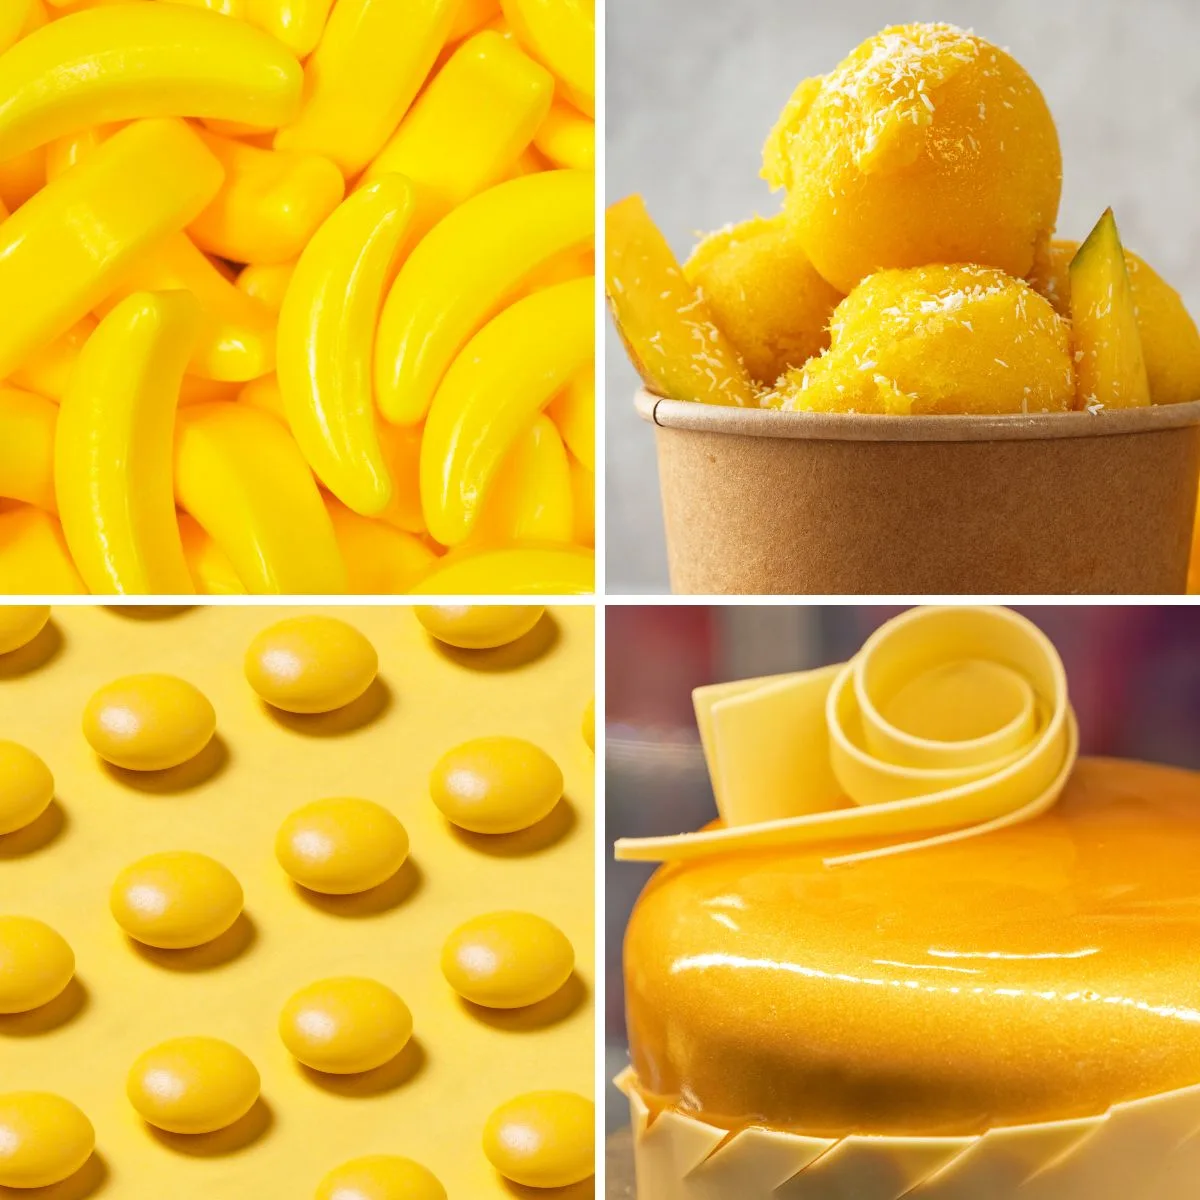 Collage of 4 yellow desserts